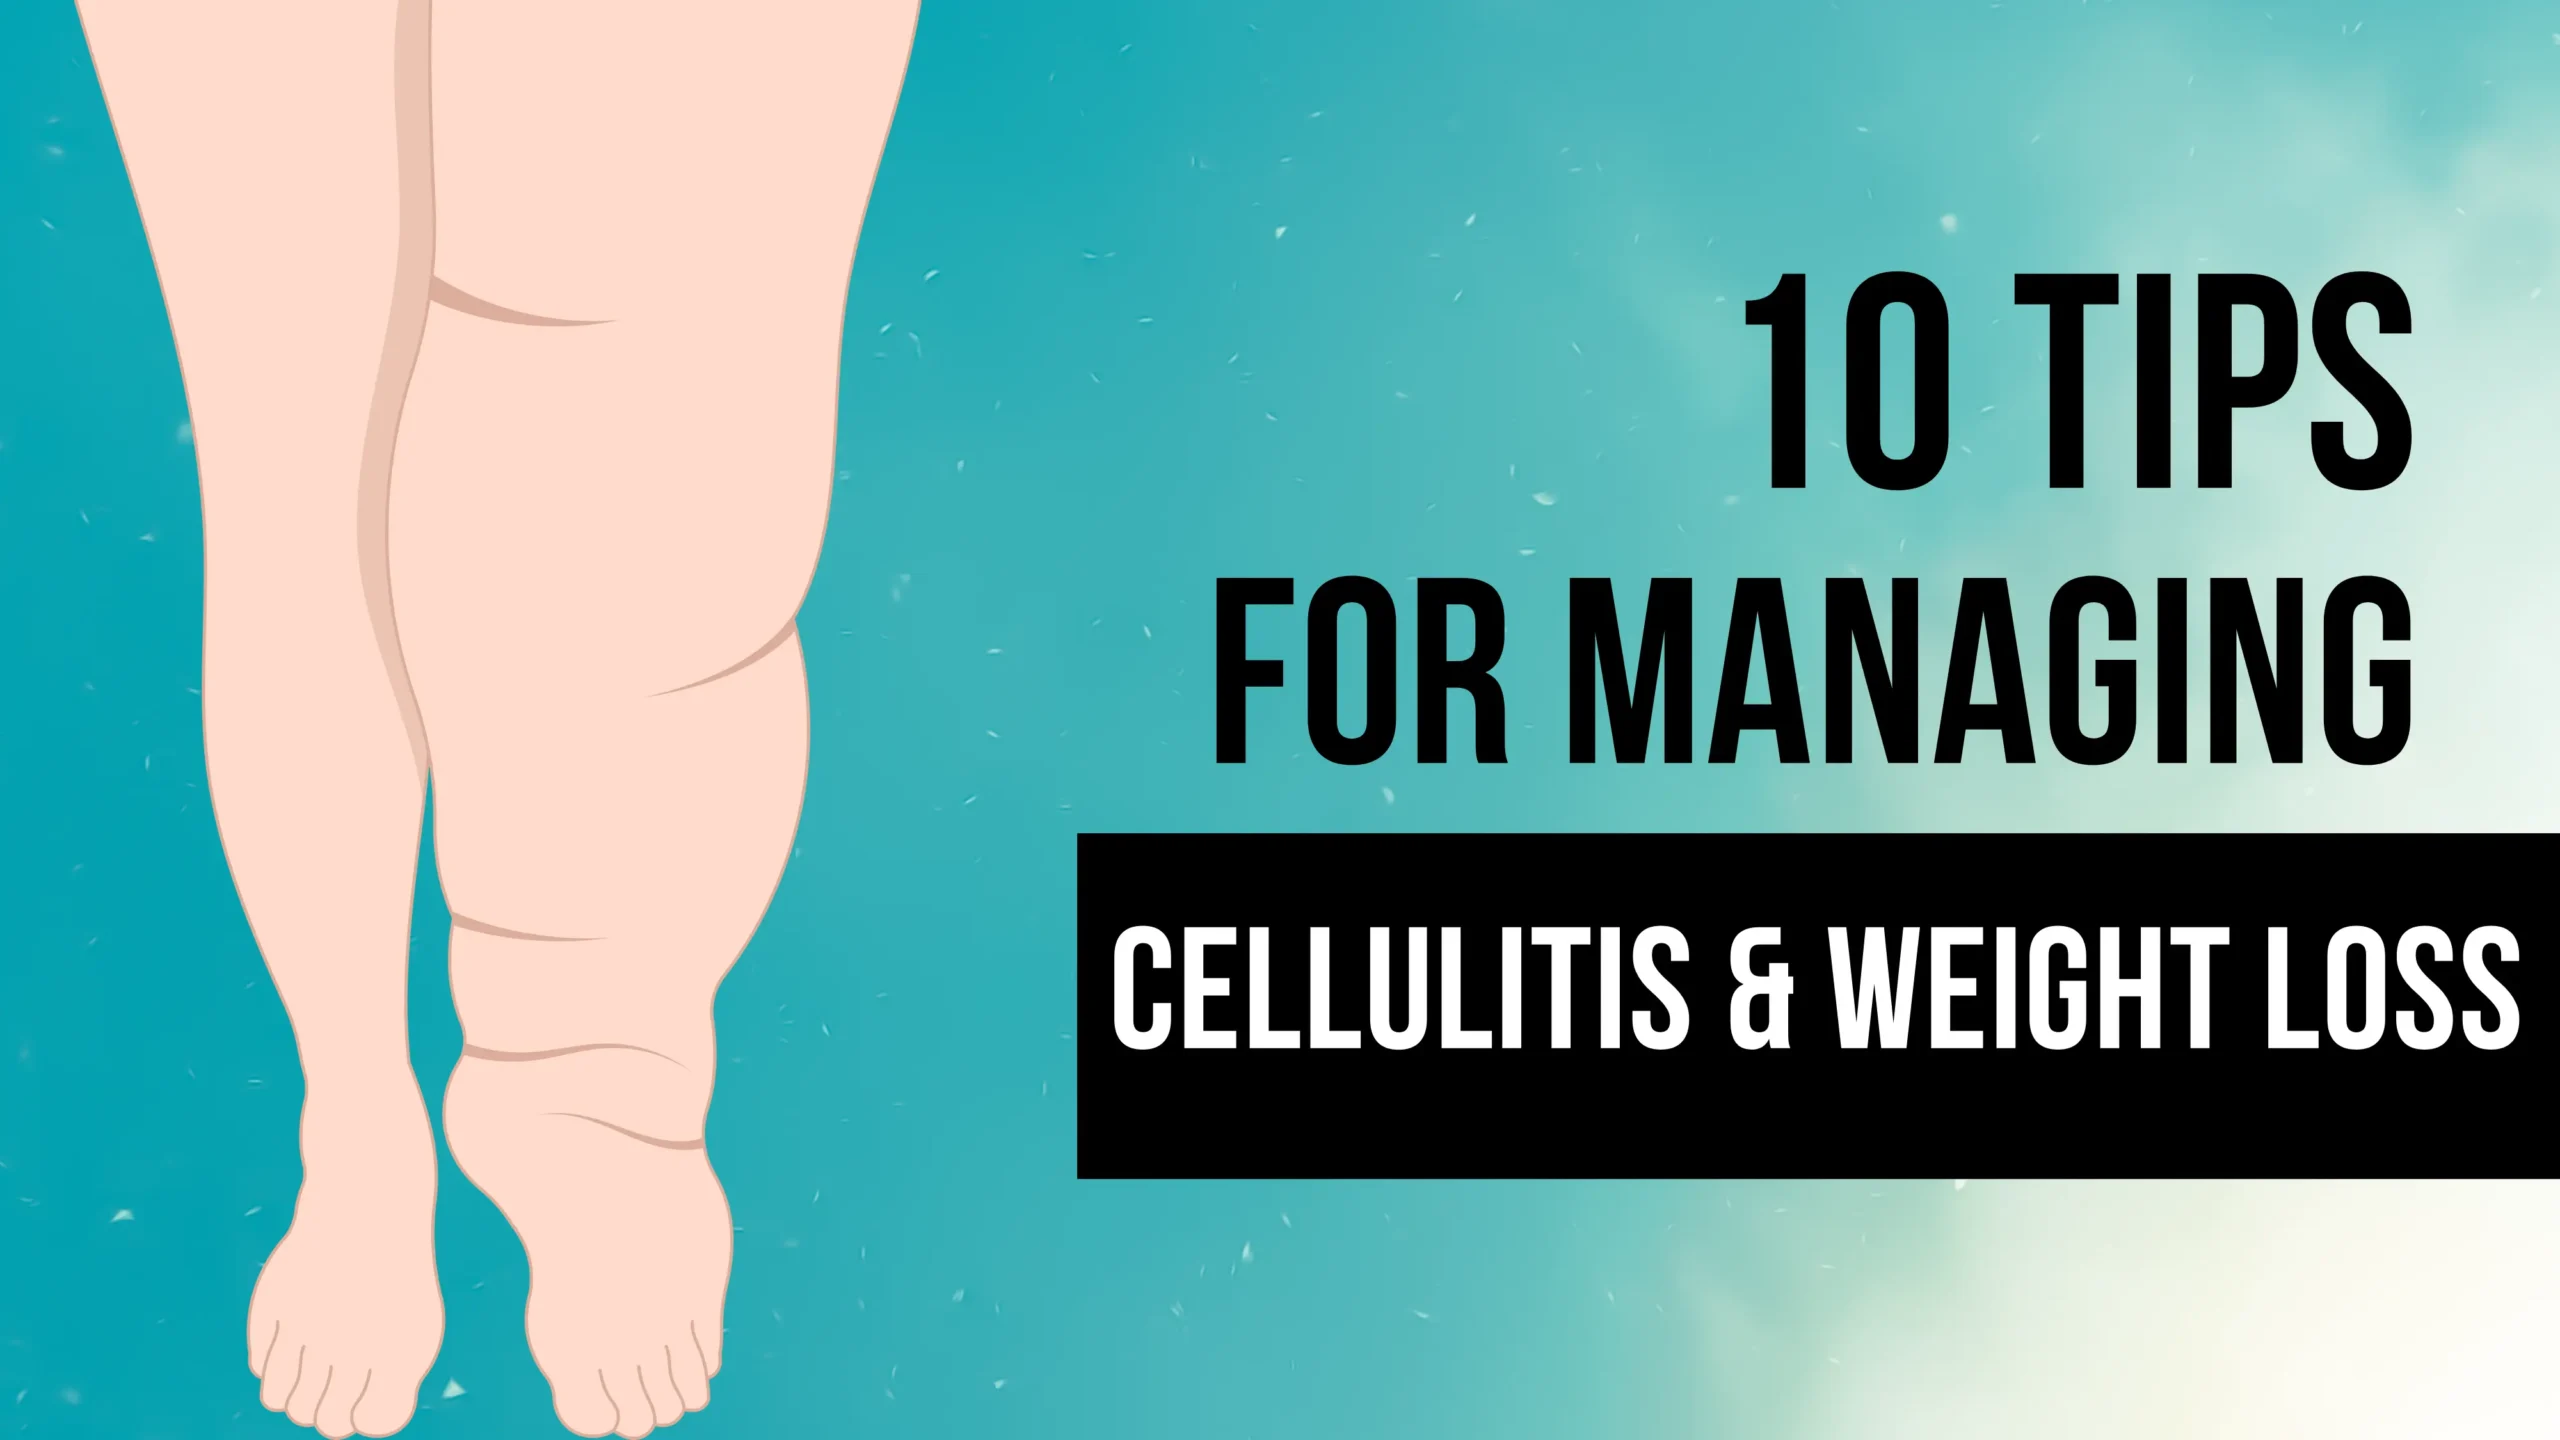 10 Tips for Managing Cellulitis and Weight Loss Effectively